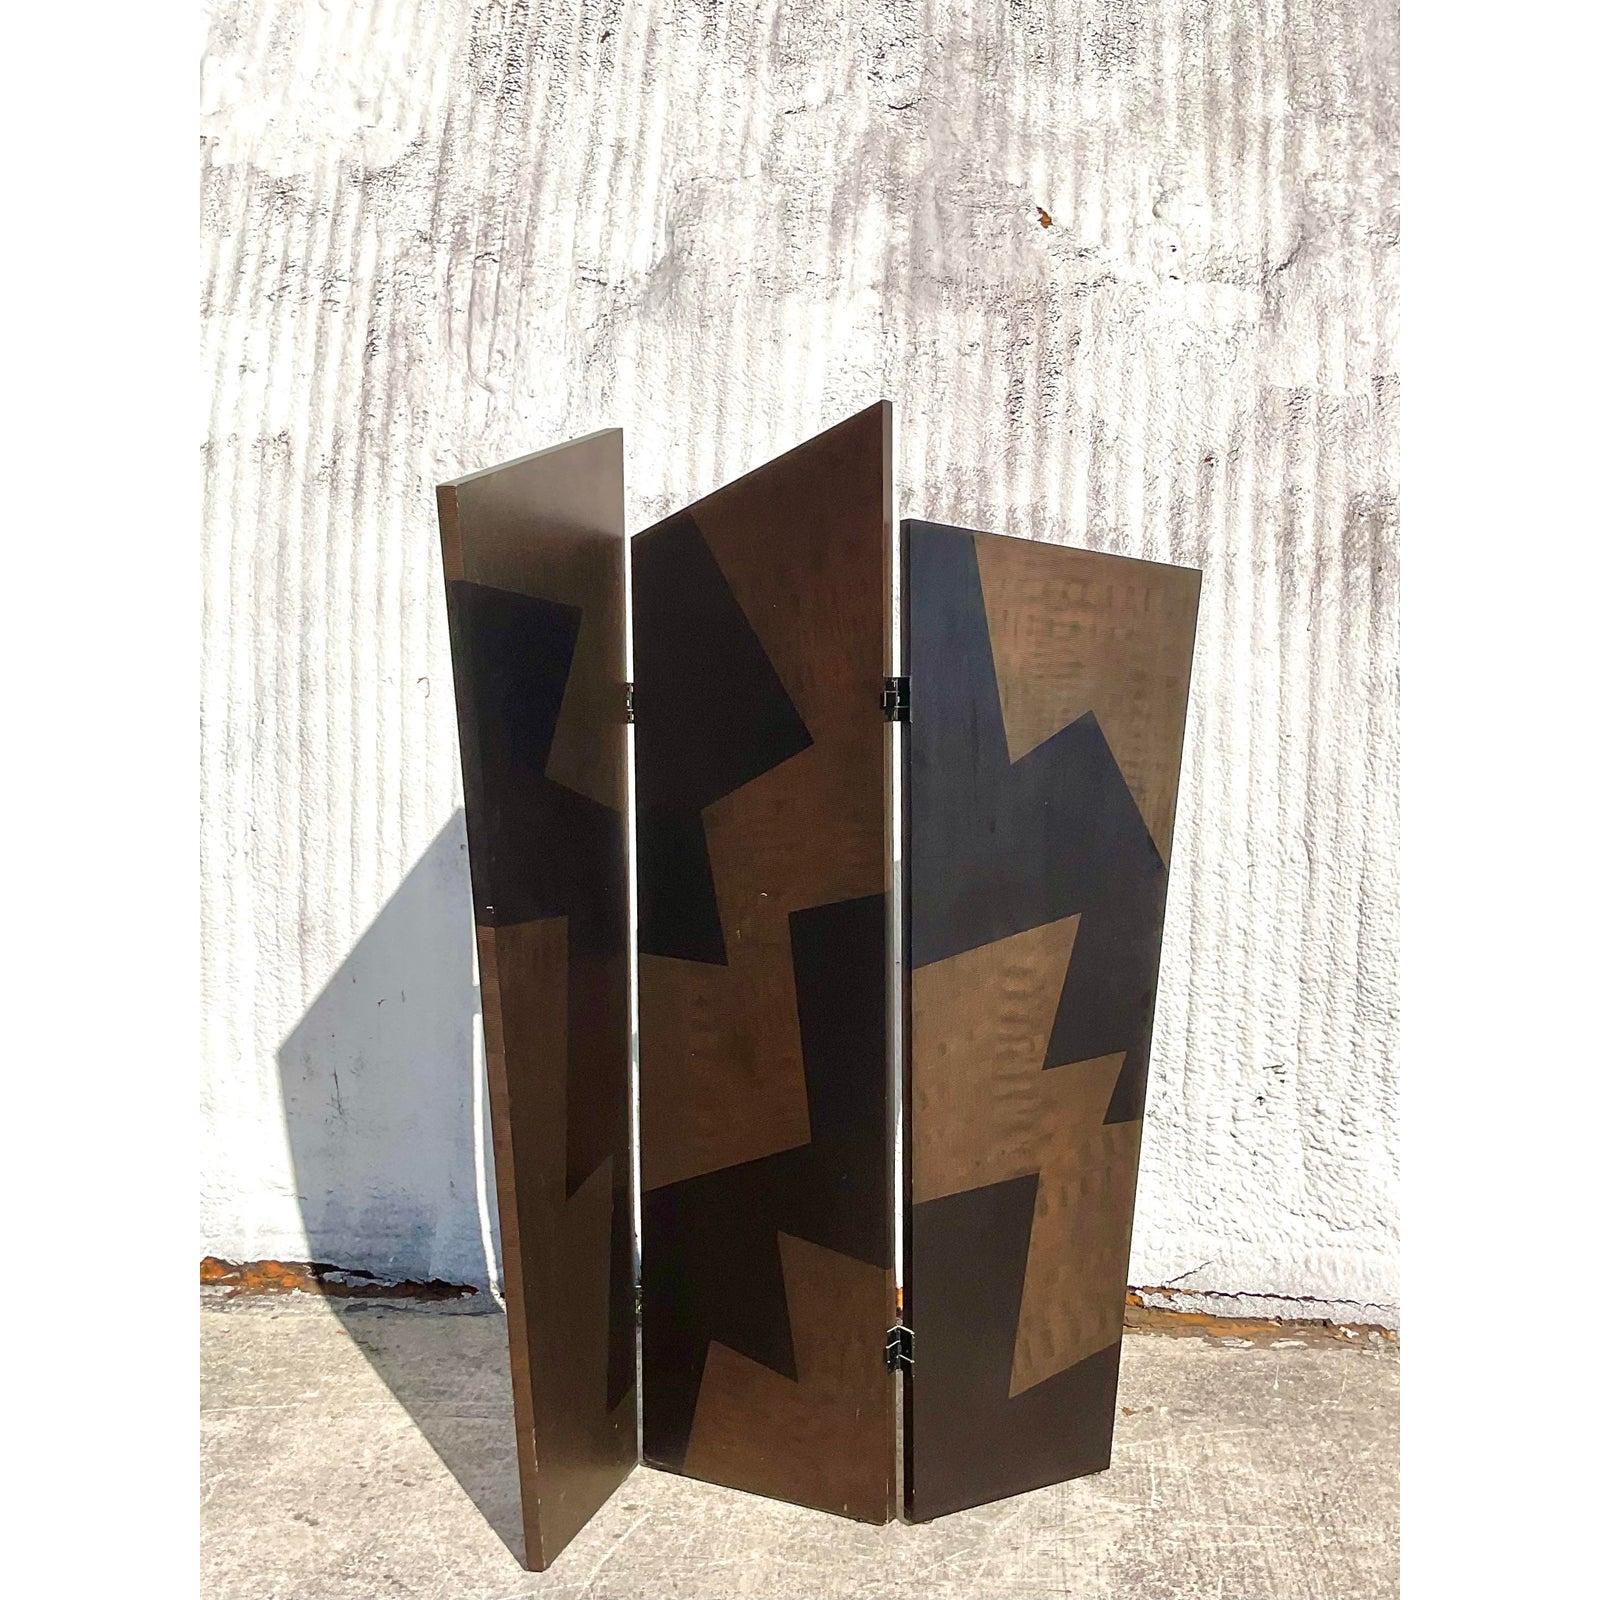 Fantastic vintage Angled wood room divider. Monumental in size and drama. Large spikes with a zig zag design in black and gold. Acquired from a Palm Beach estate.